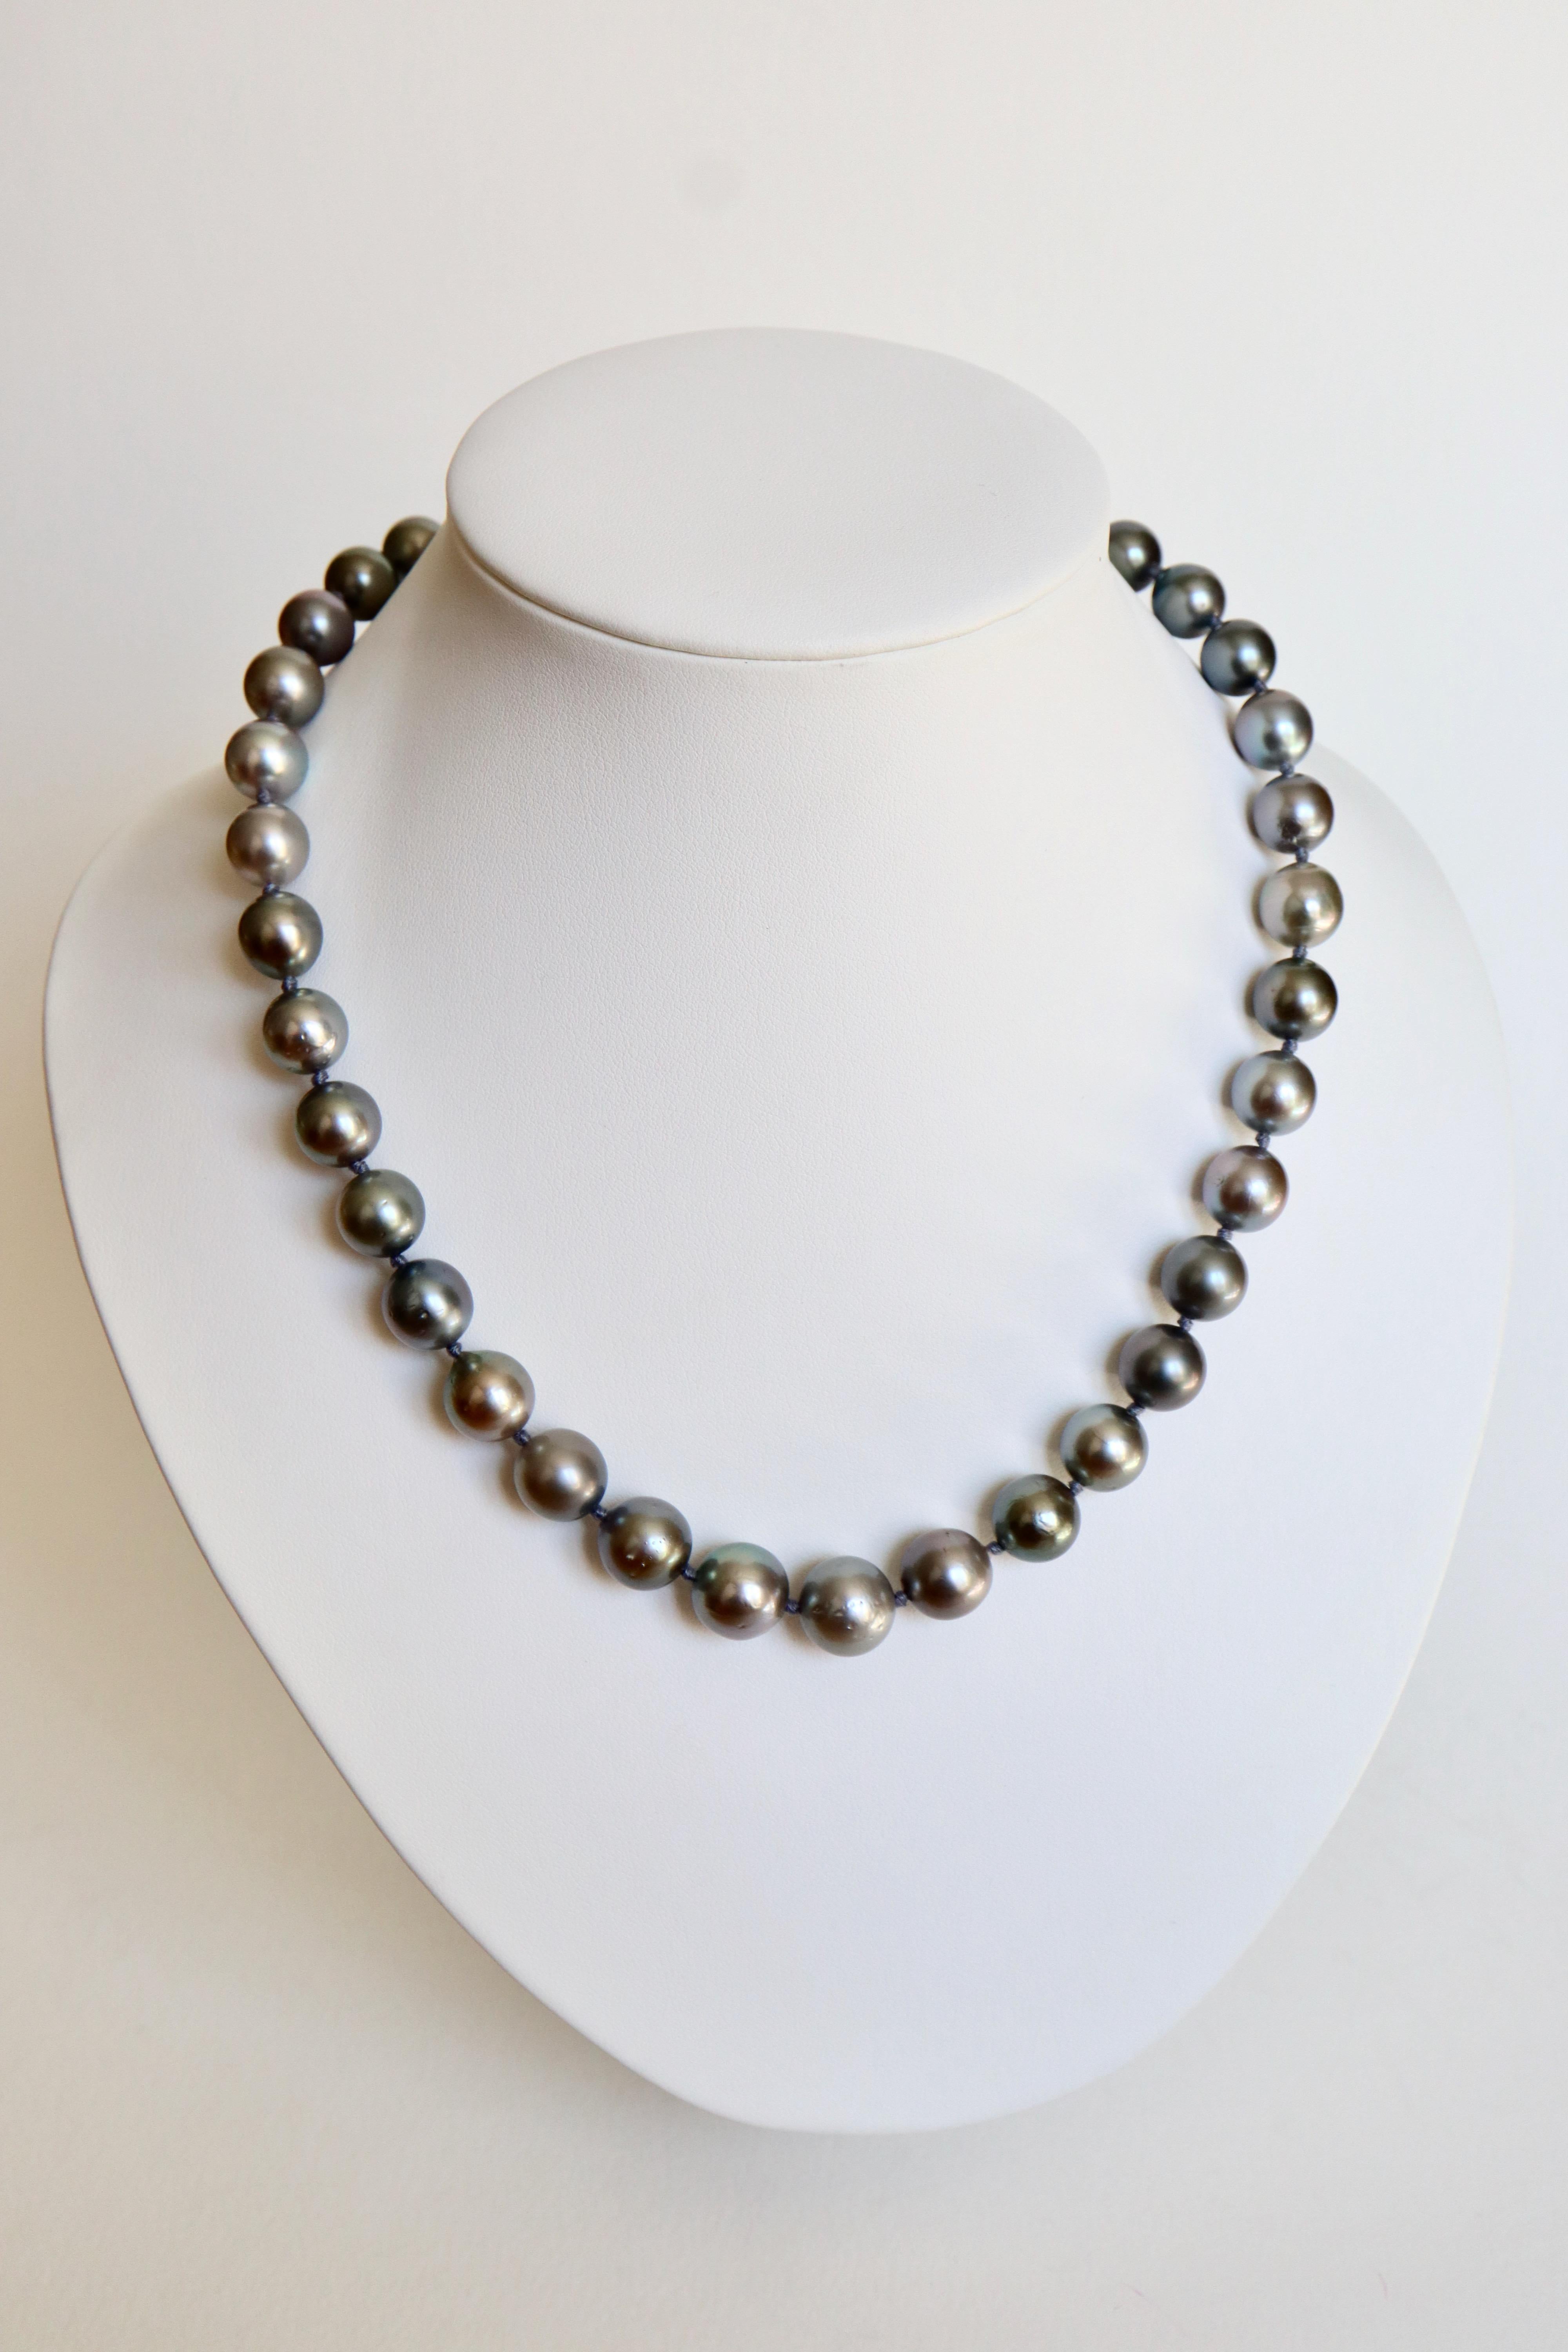 Necklace of Cultured Grey Pearls 9 mm to 13 mm For Sale 4